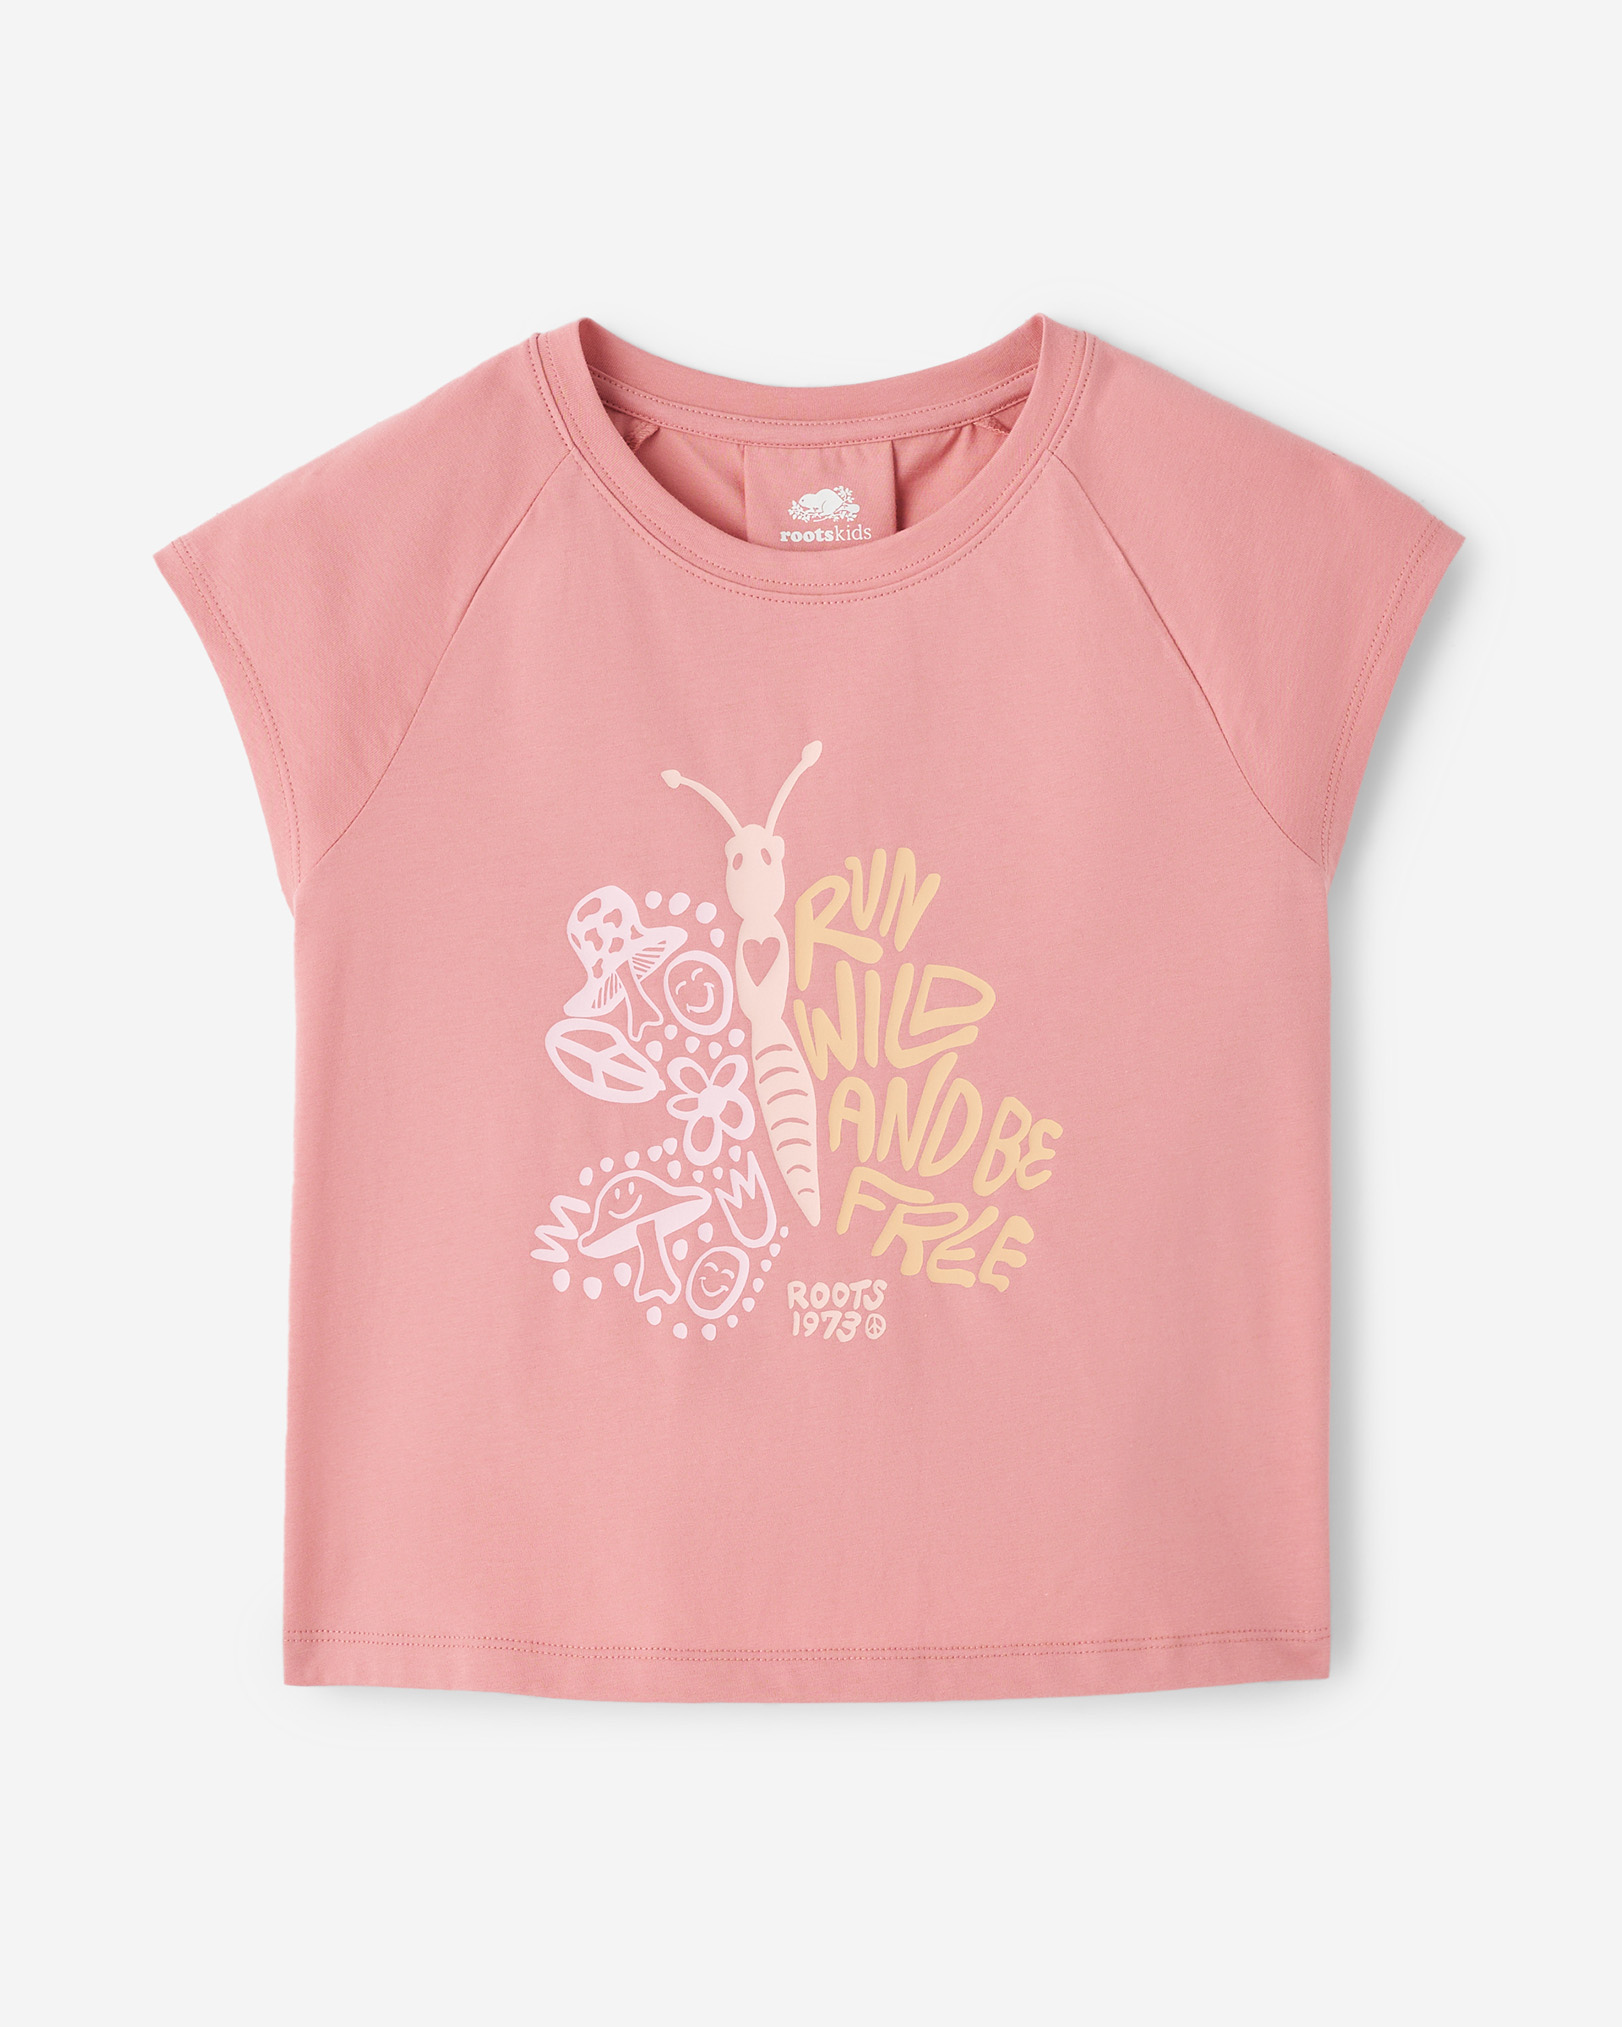 Roots Girl's Wild & Free T-Shirt in Mauveglow